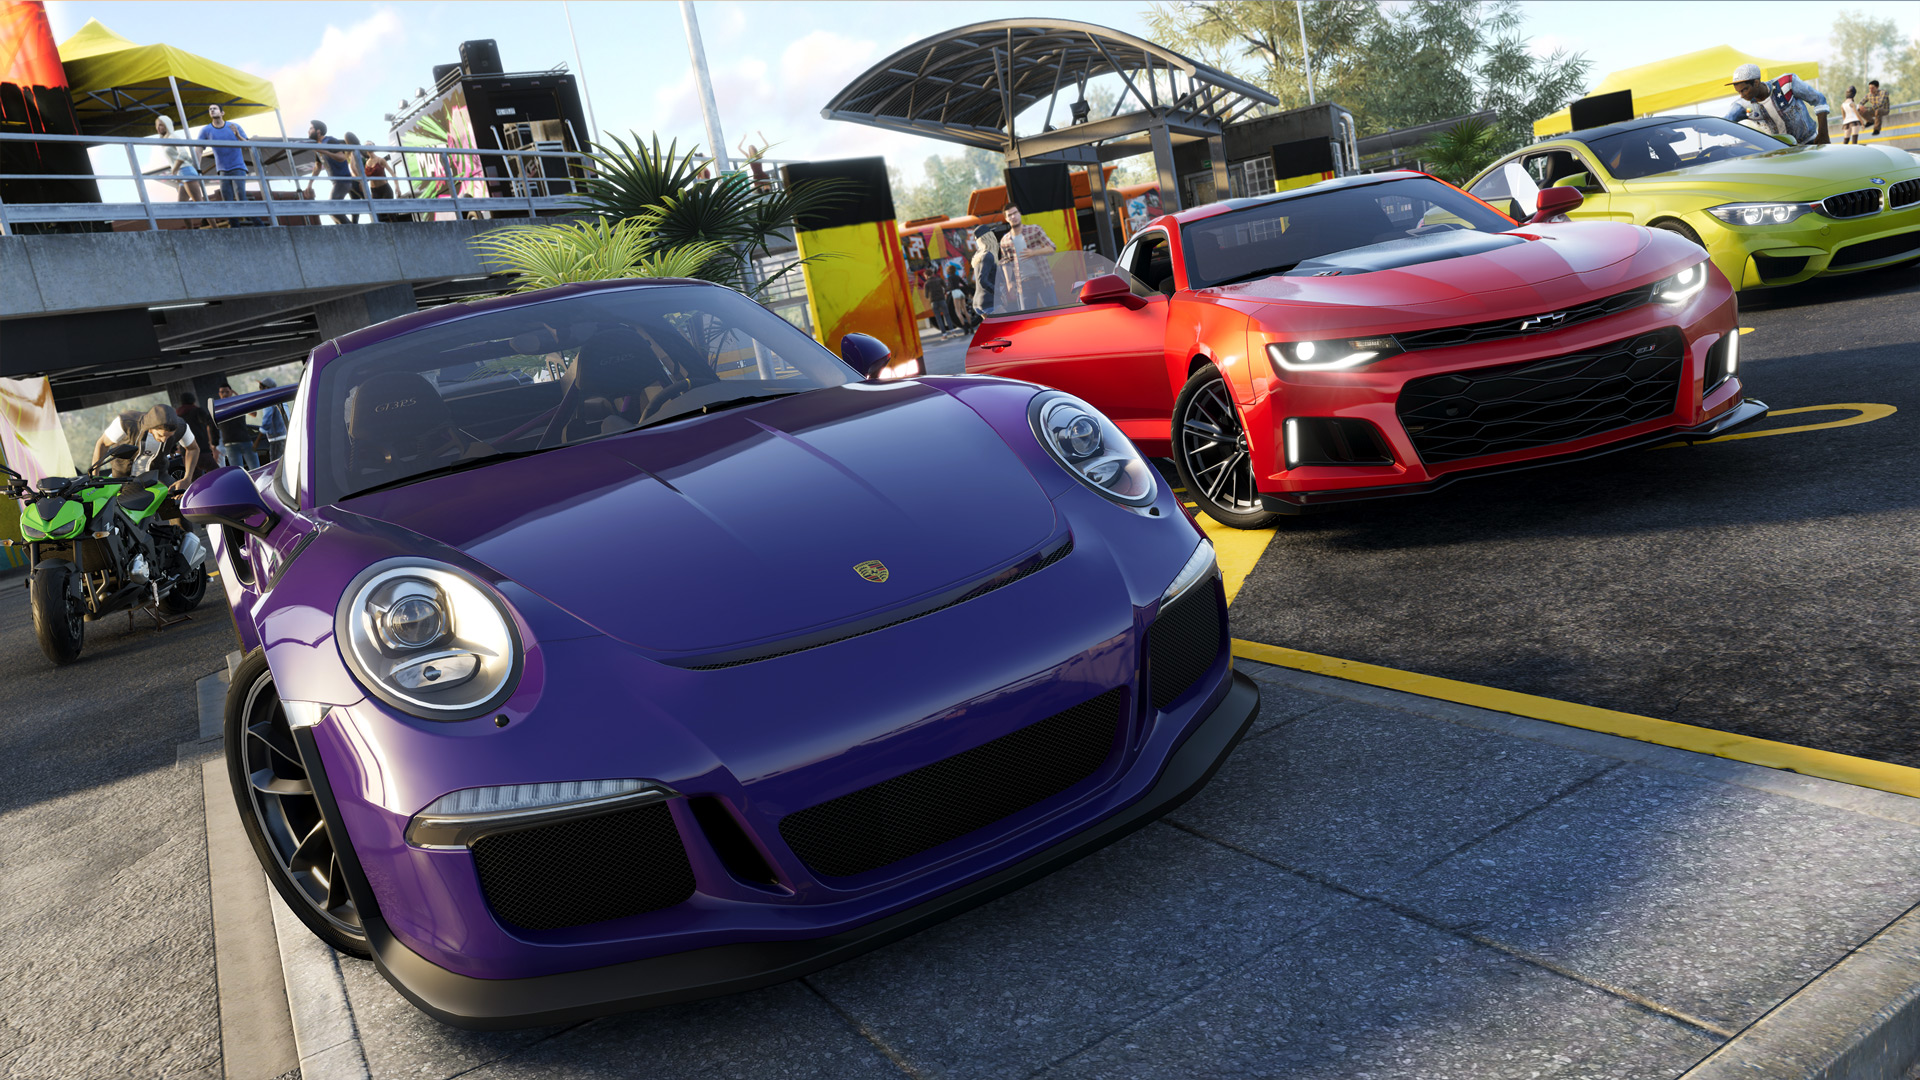 The Crew 2 Pre-order And Release Details Published